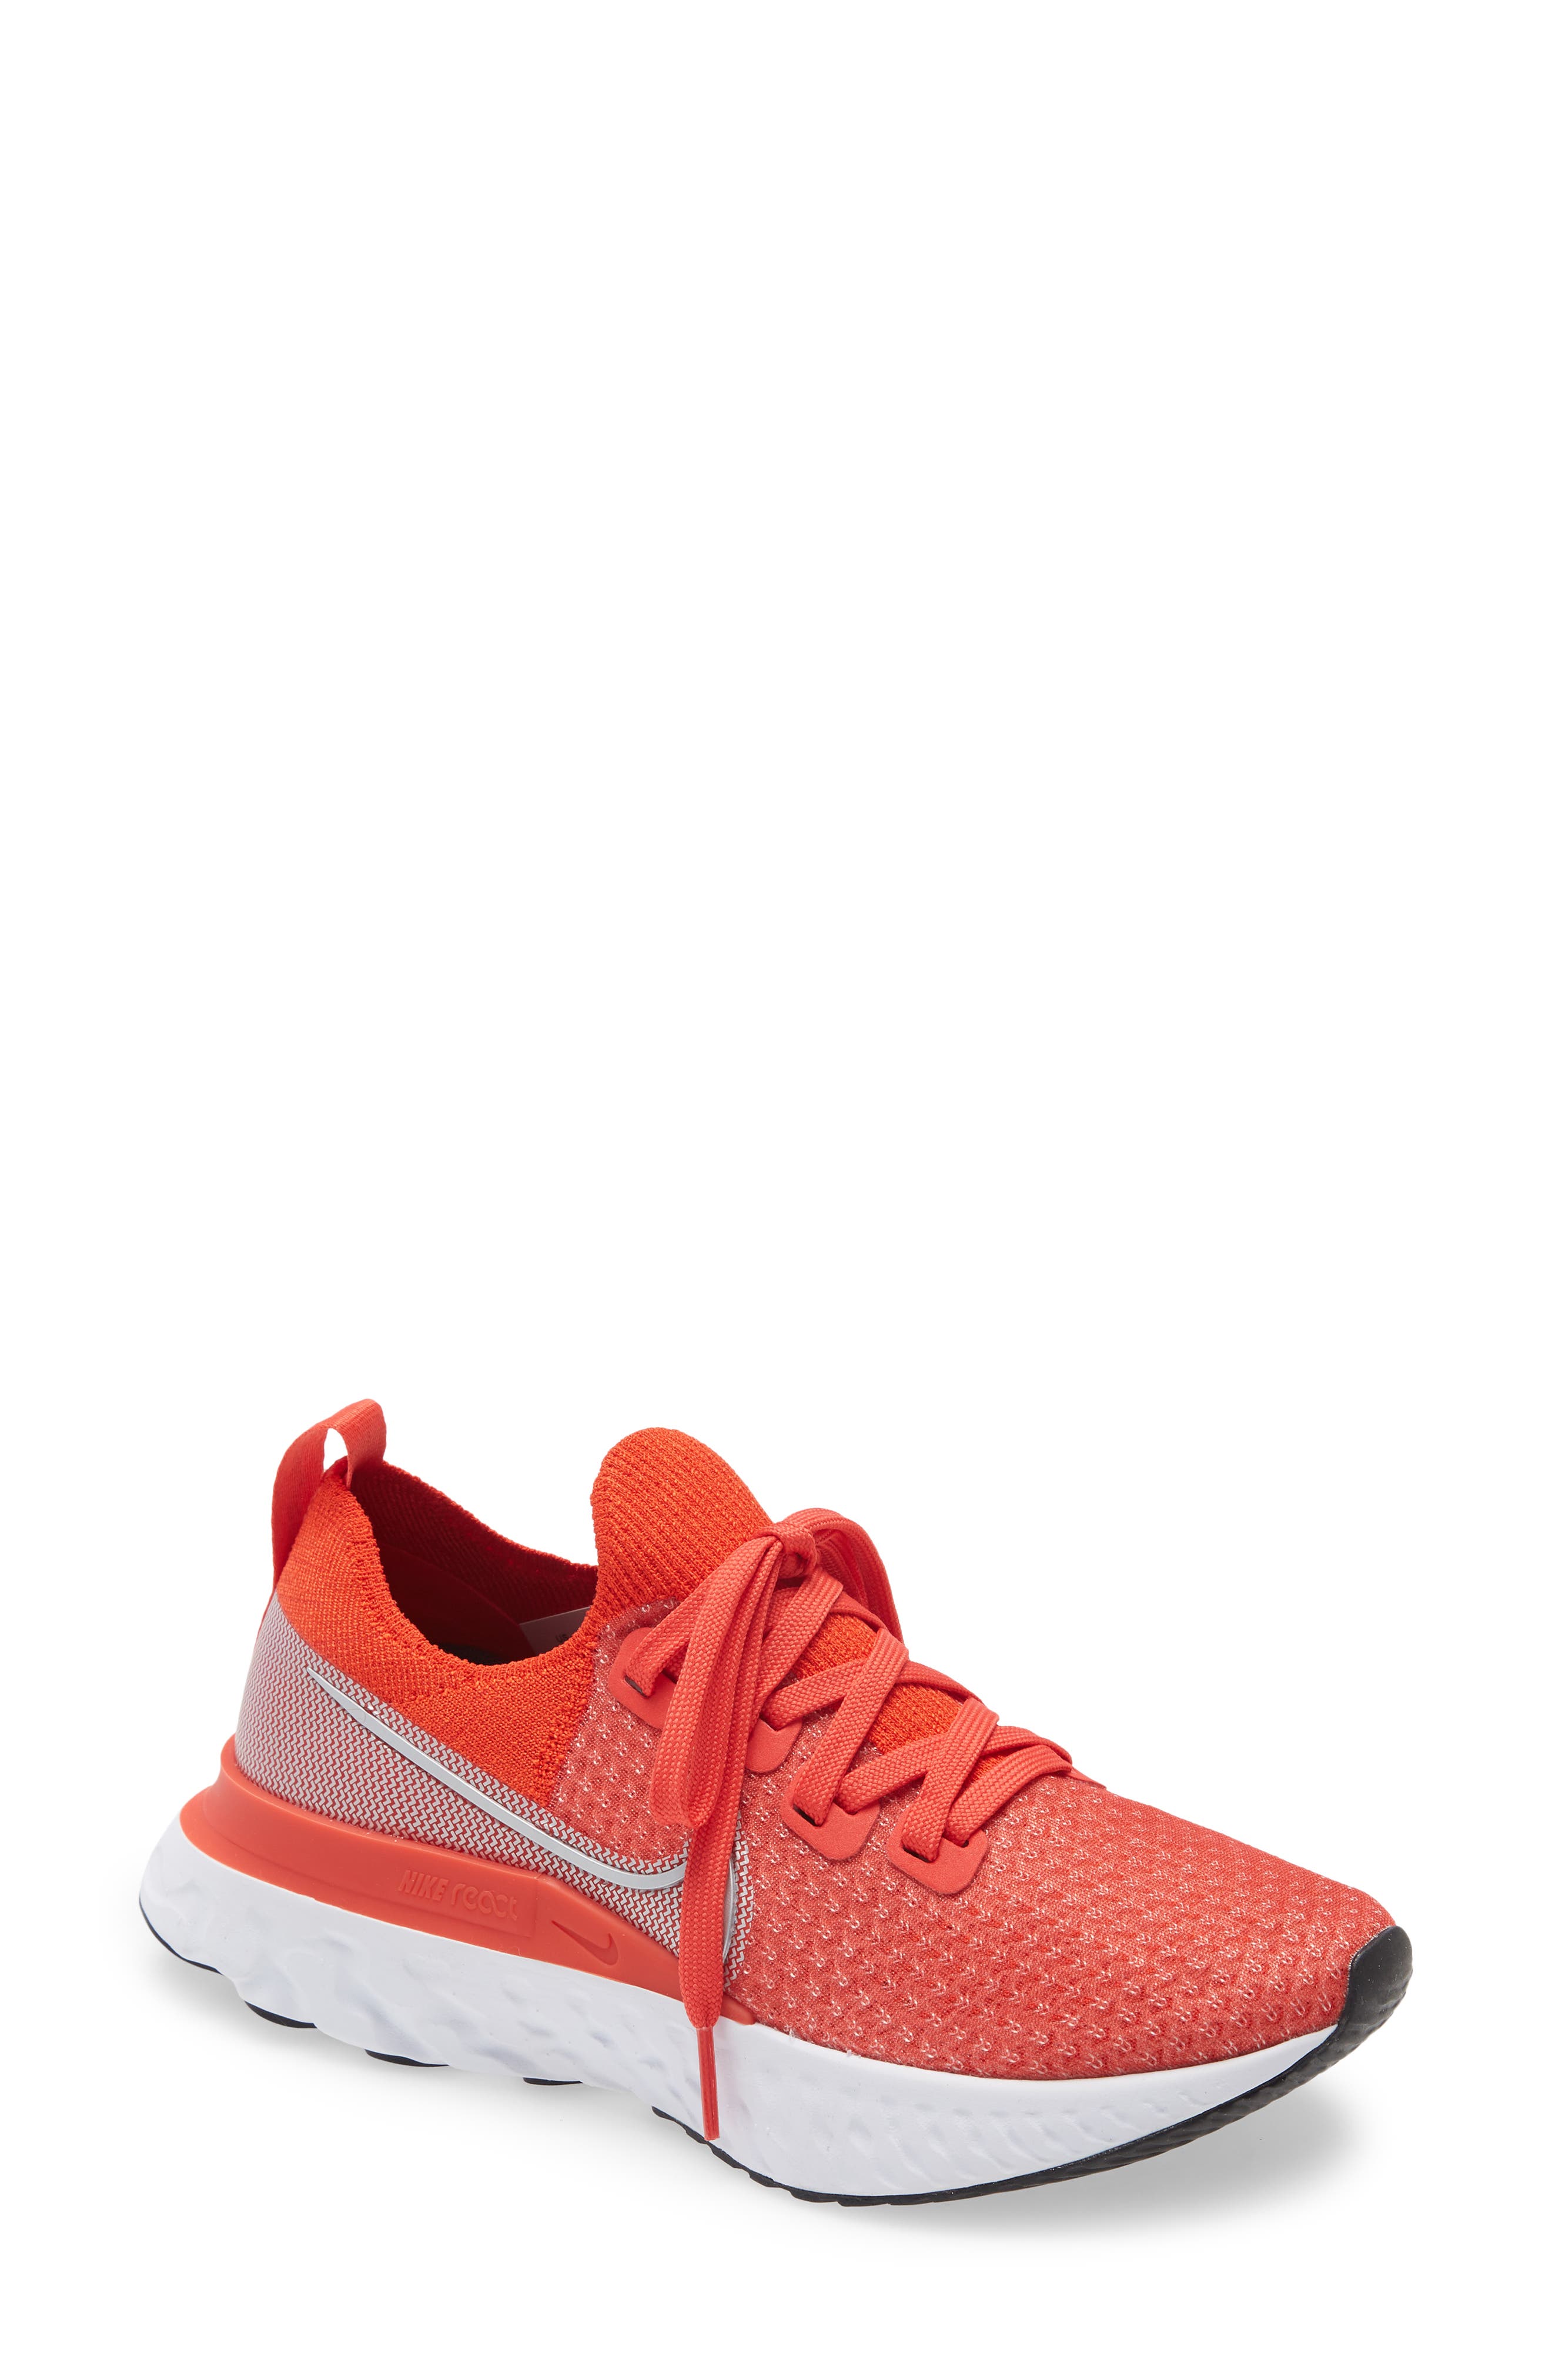 nordstrom nike womens shoes sale